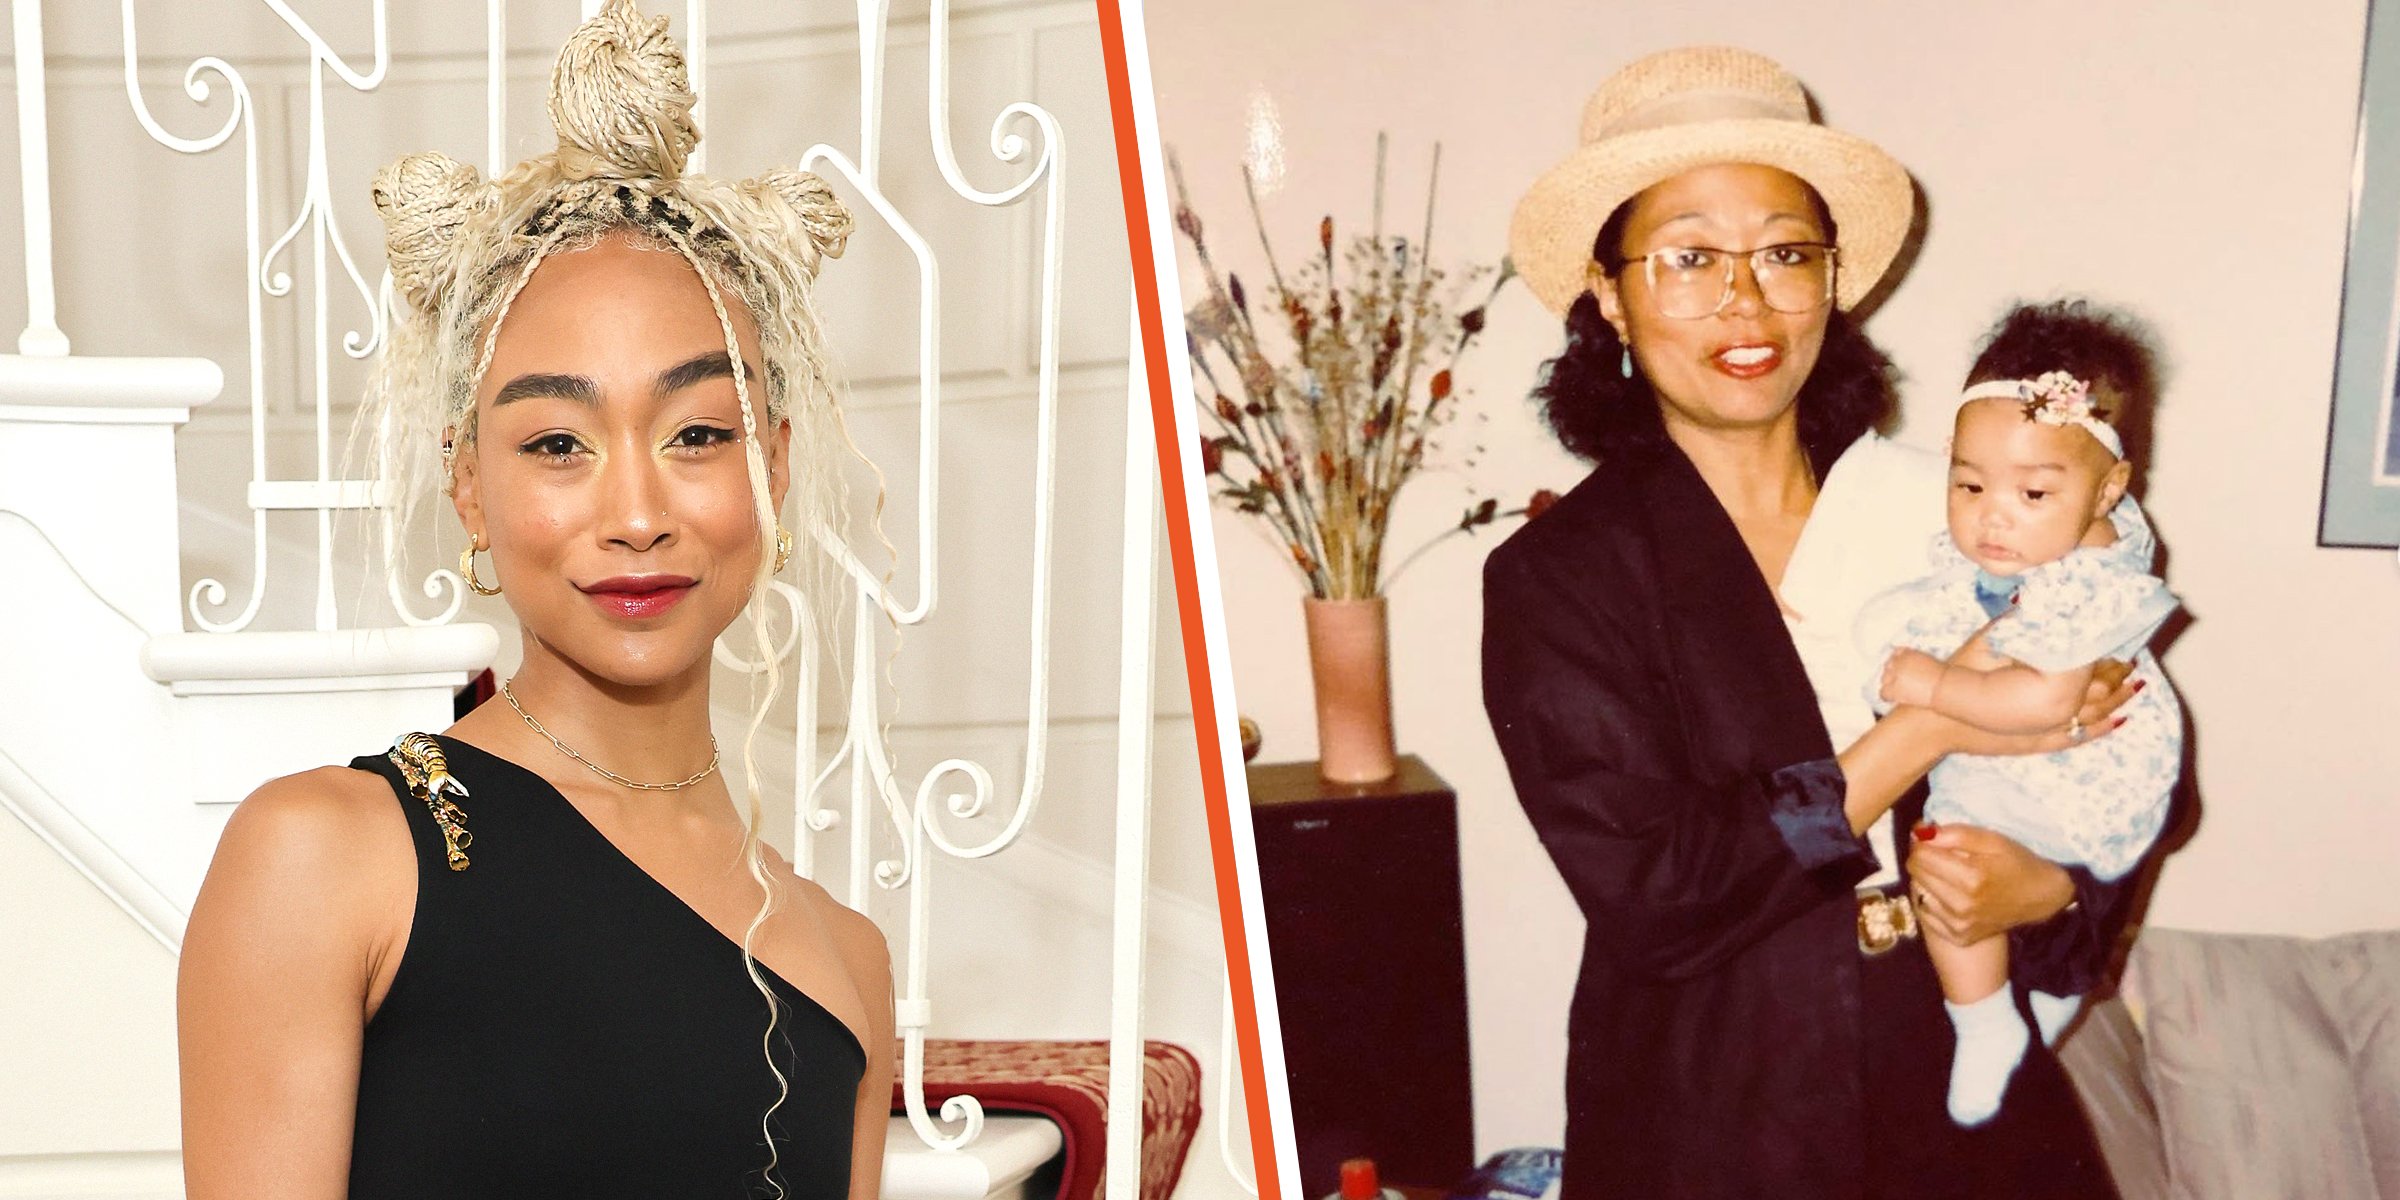 Tati Gabrielle's Parents Steered Her Towards a Career in the Film Industry